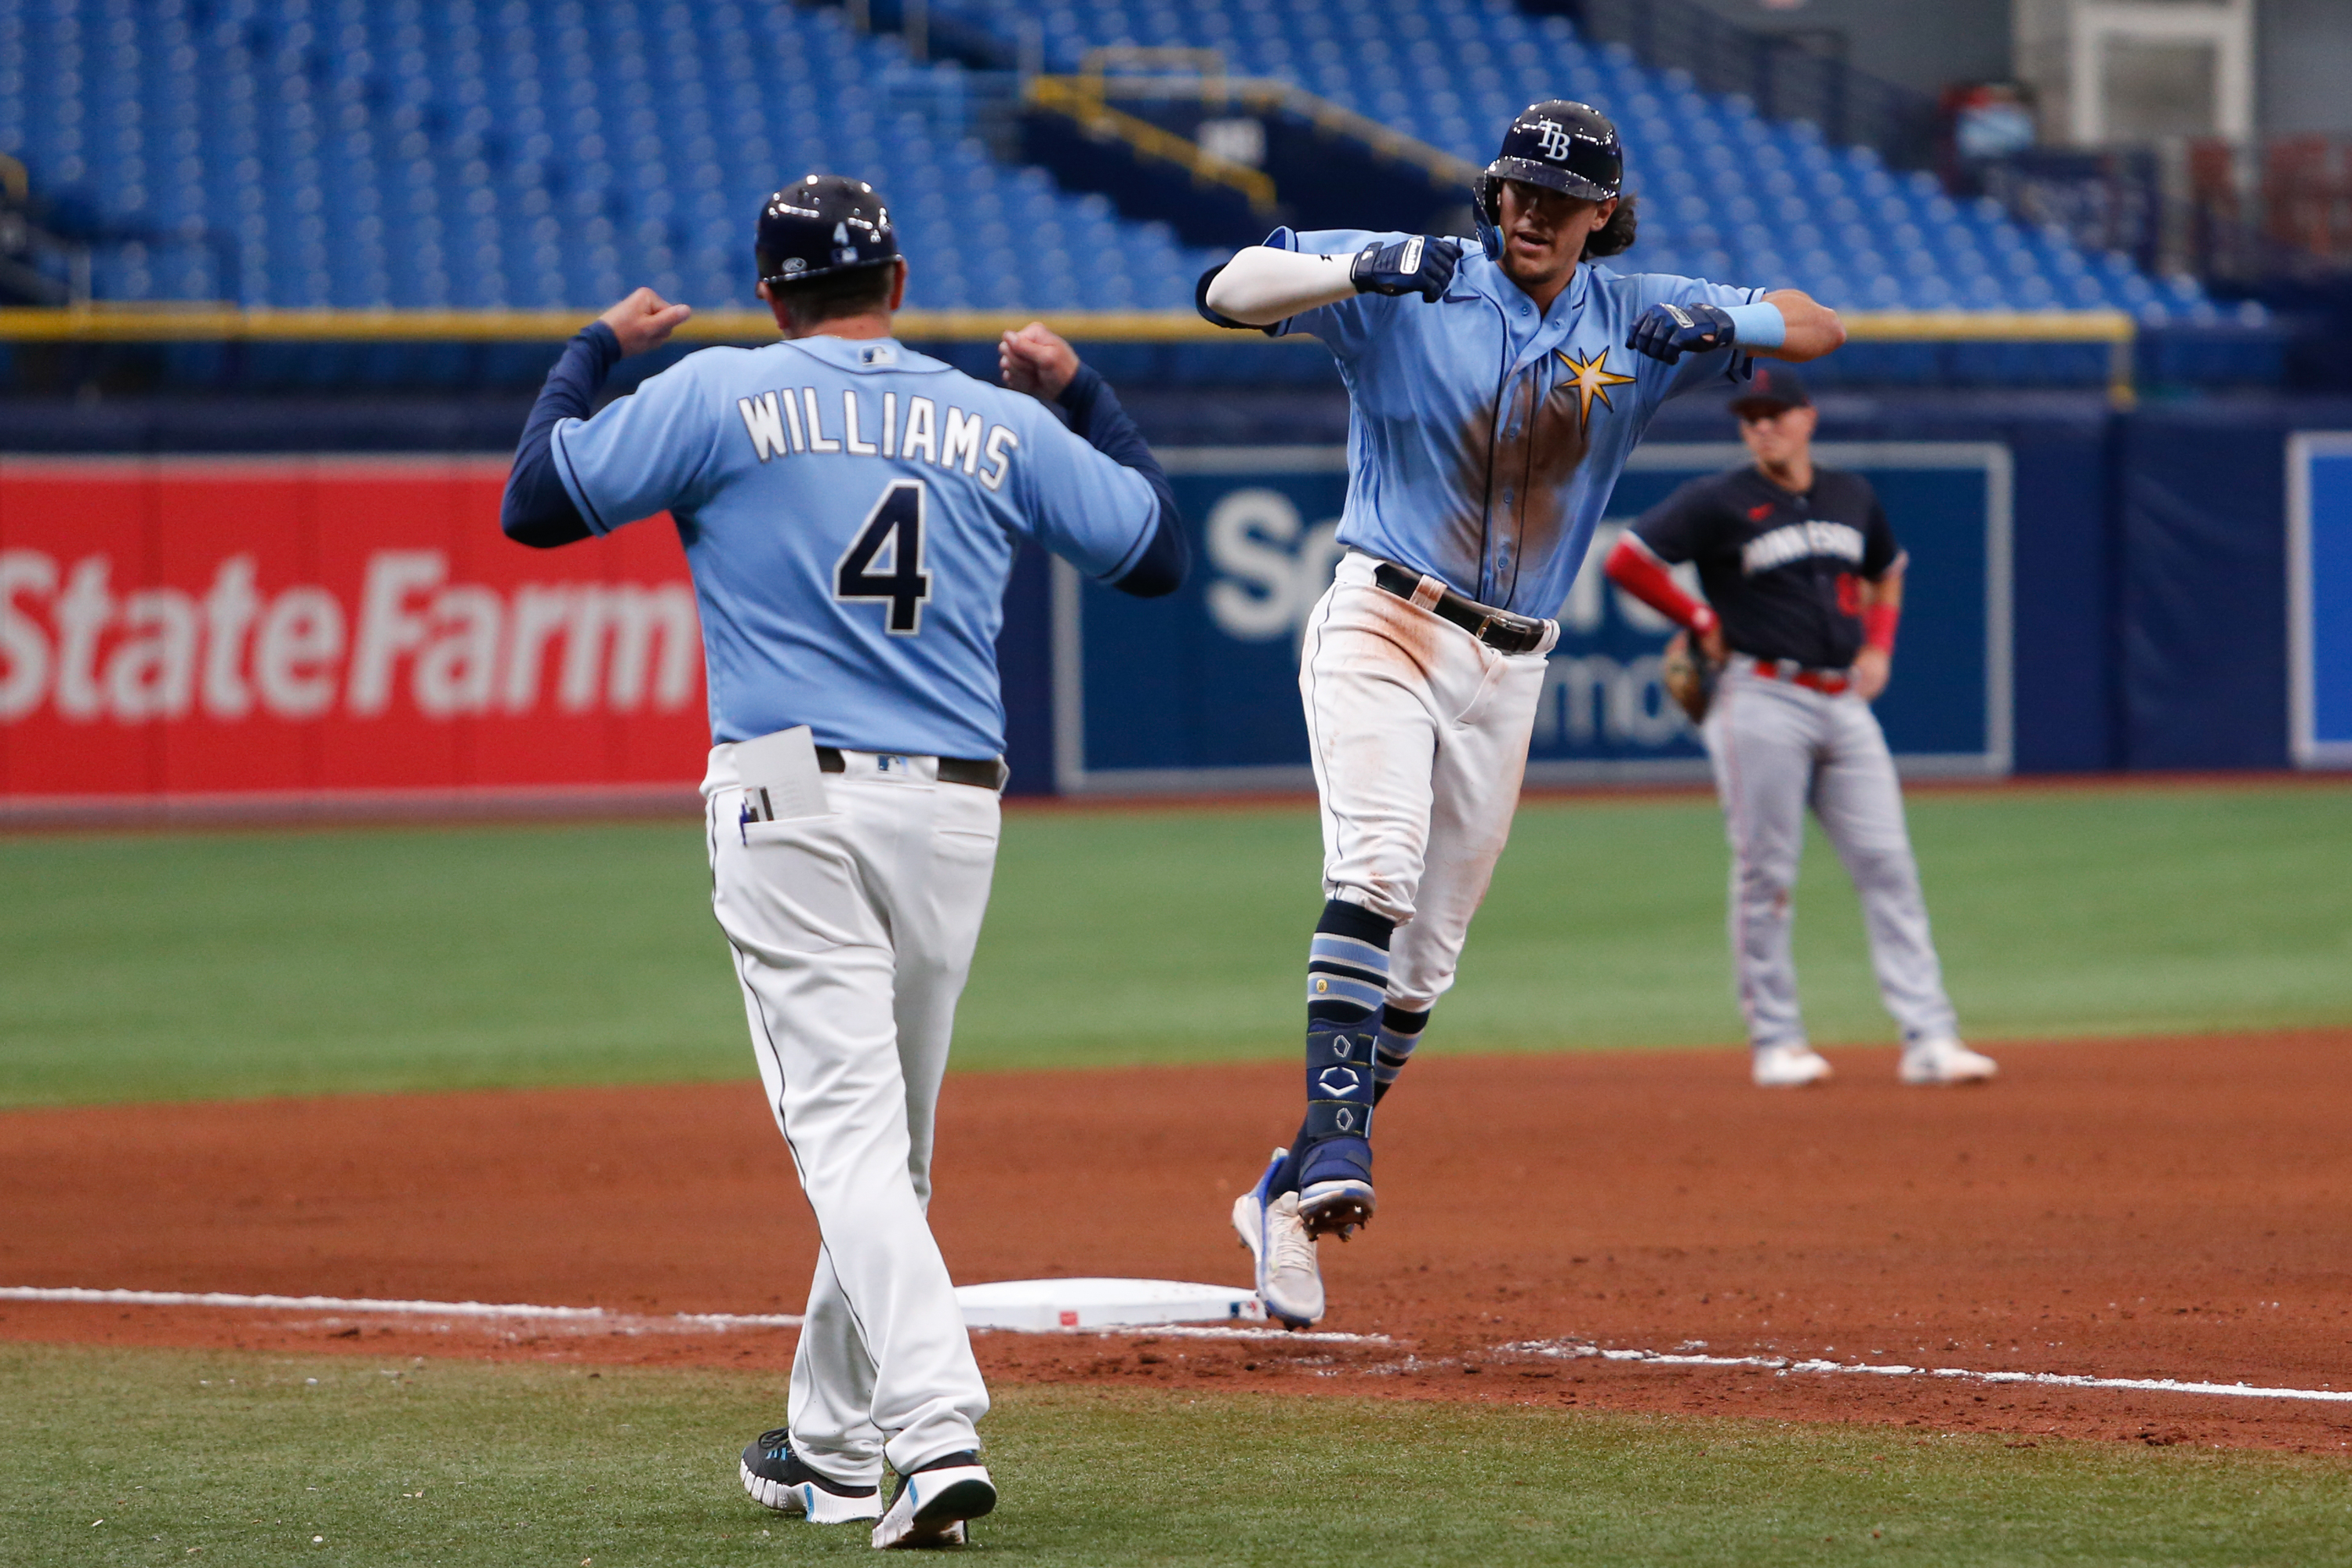 Twins pitchers struggle against top of Rays lineup in 7-4 loss